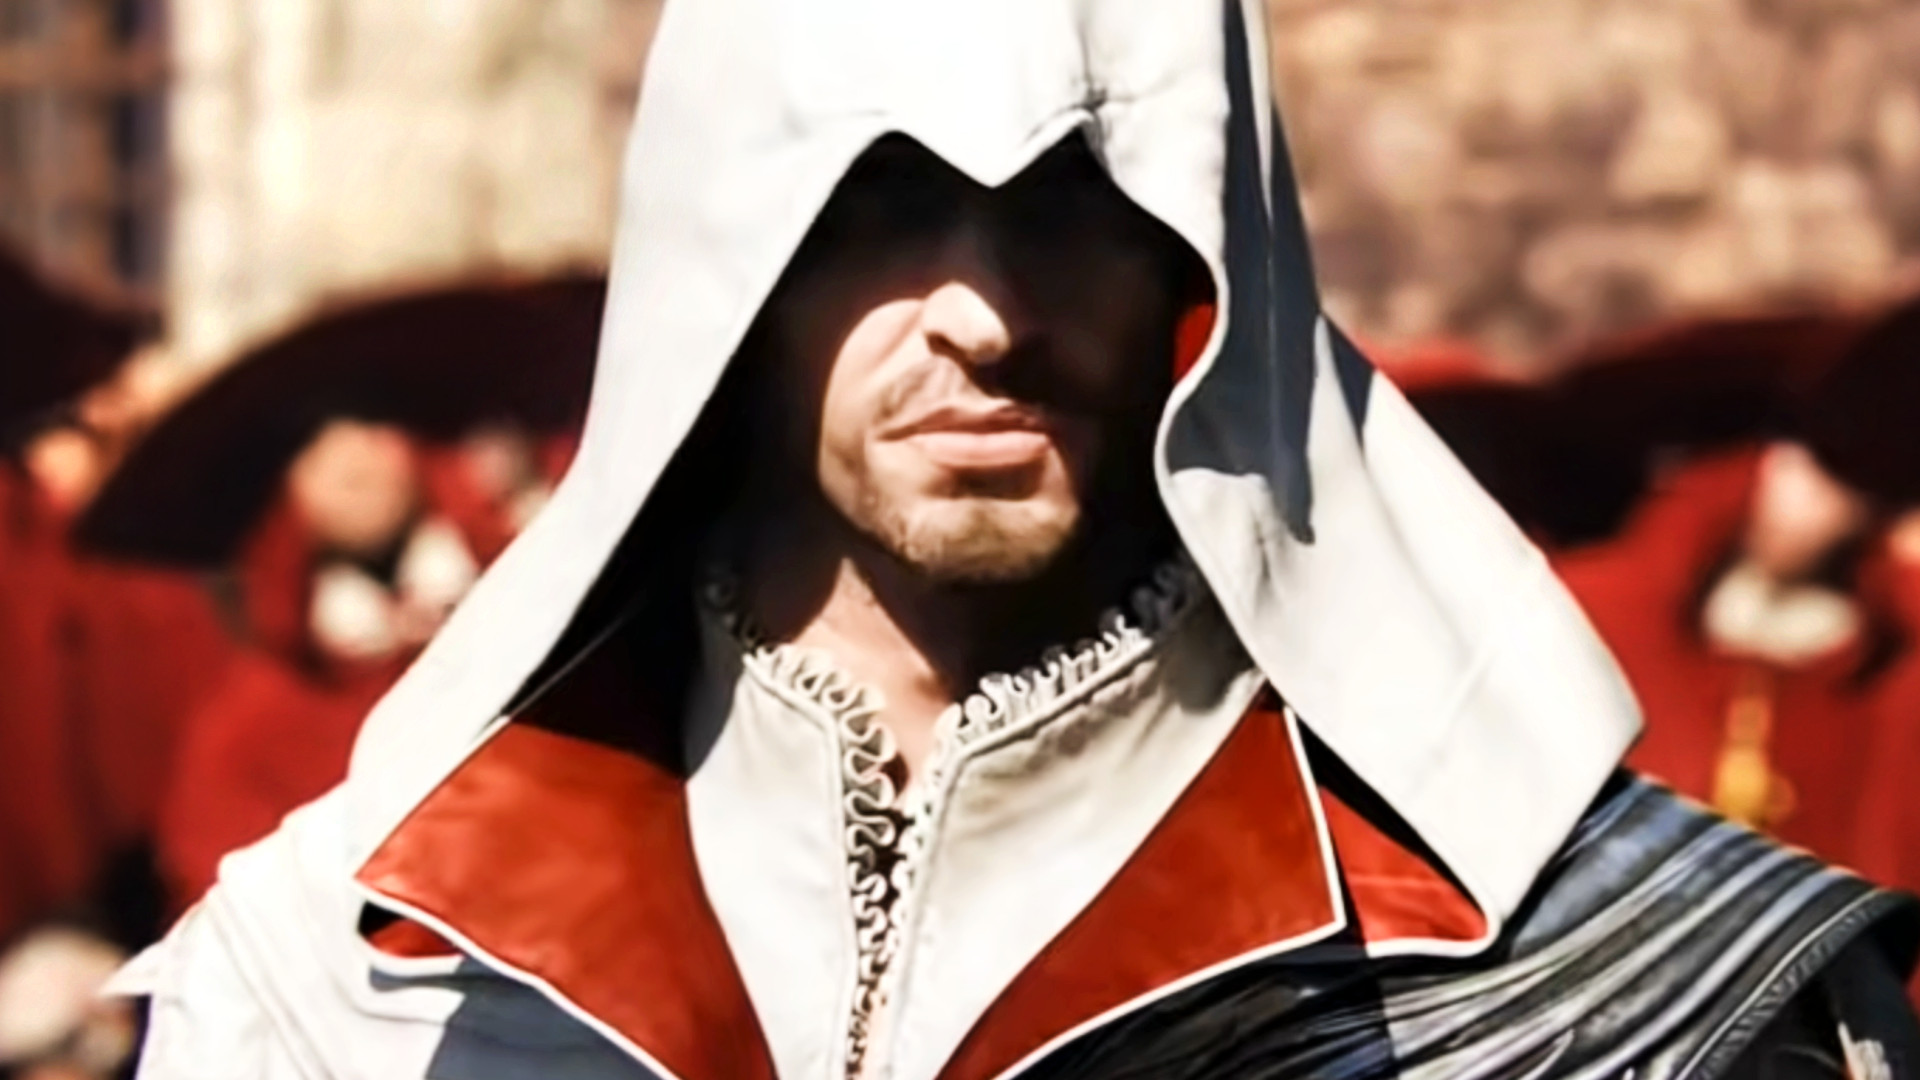 Every Assassin's Creed game is ultra cheap now, so grab them quick